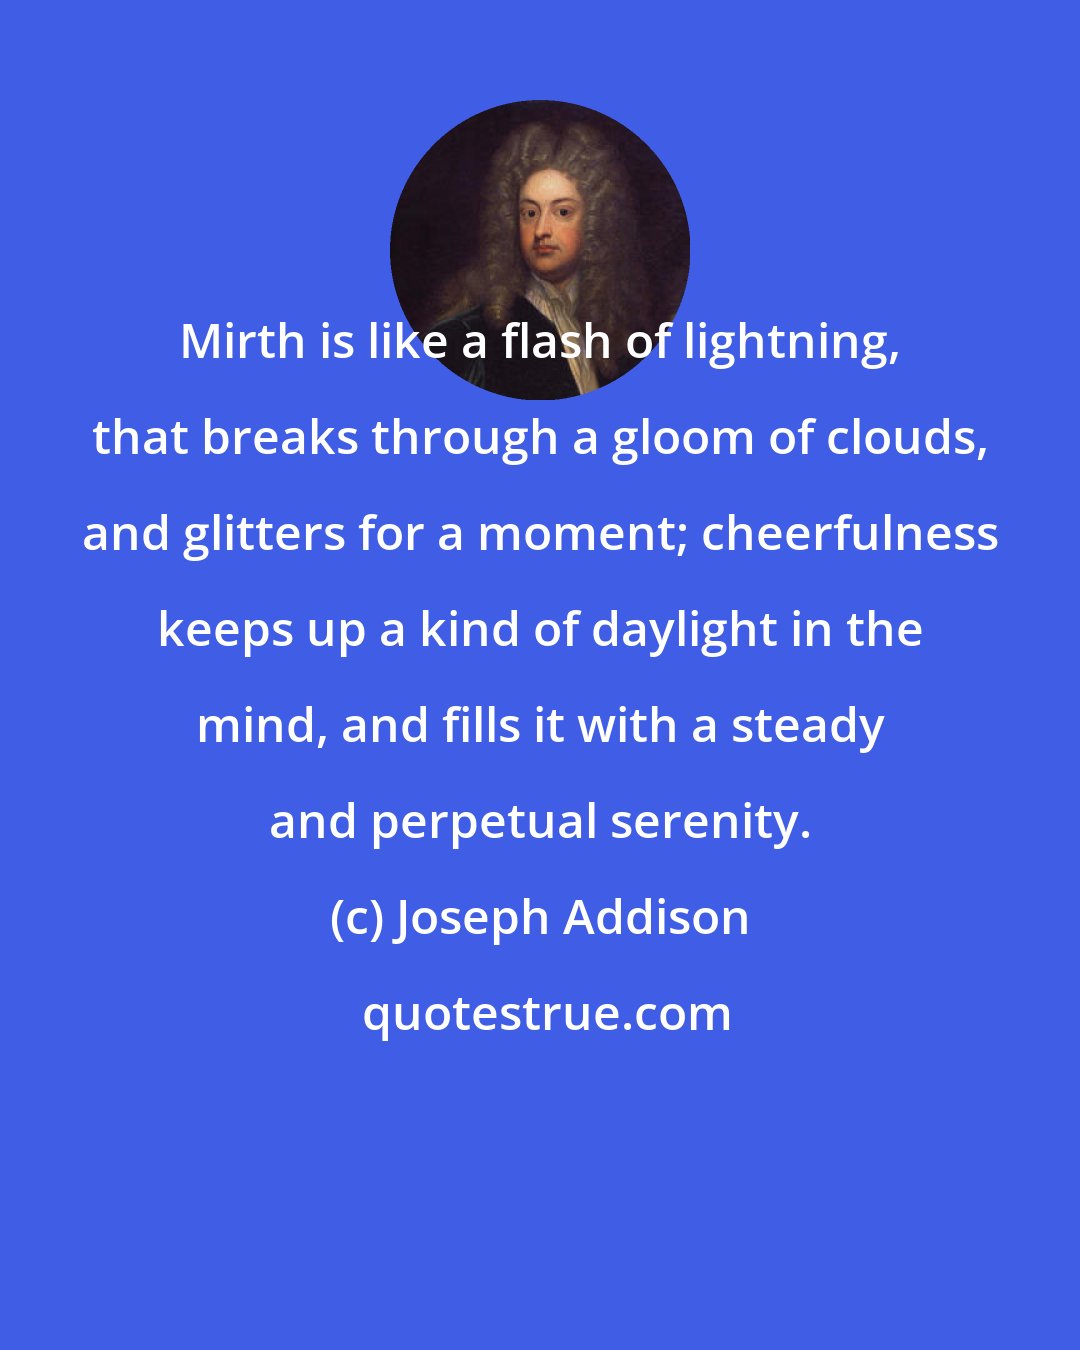 Joseph Addison: Mirth is like a flash of lightning, that breaks through a gloom of clouds, and glitters for a moment; cheerfulness keeps up a kind of daylight in the mind, and fills it with a steady and perpetual serenity.